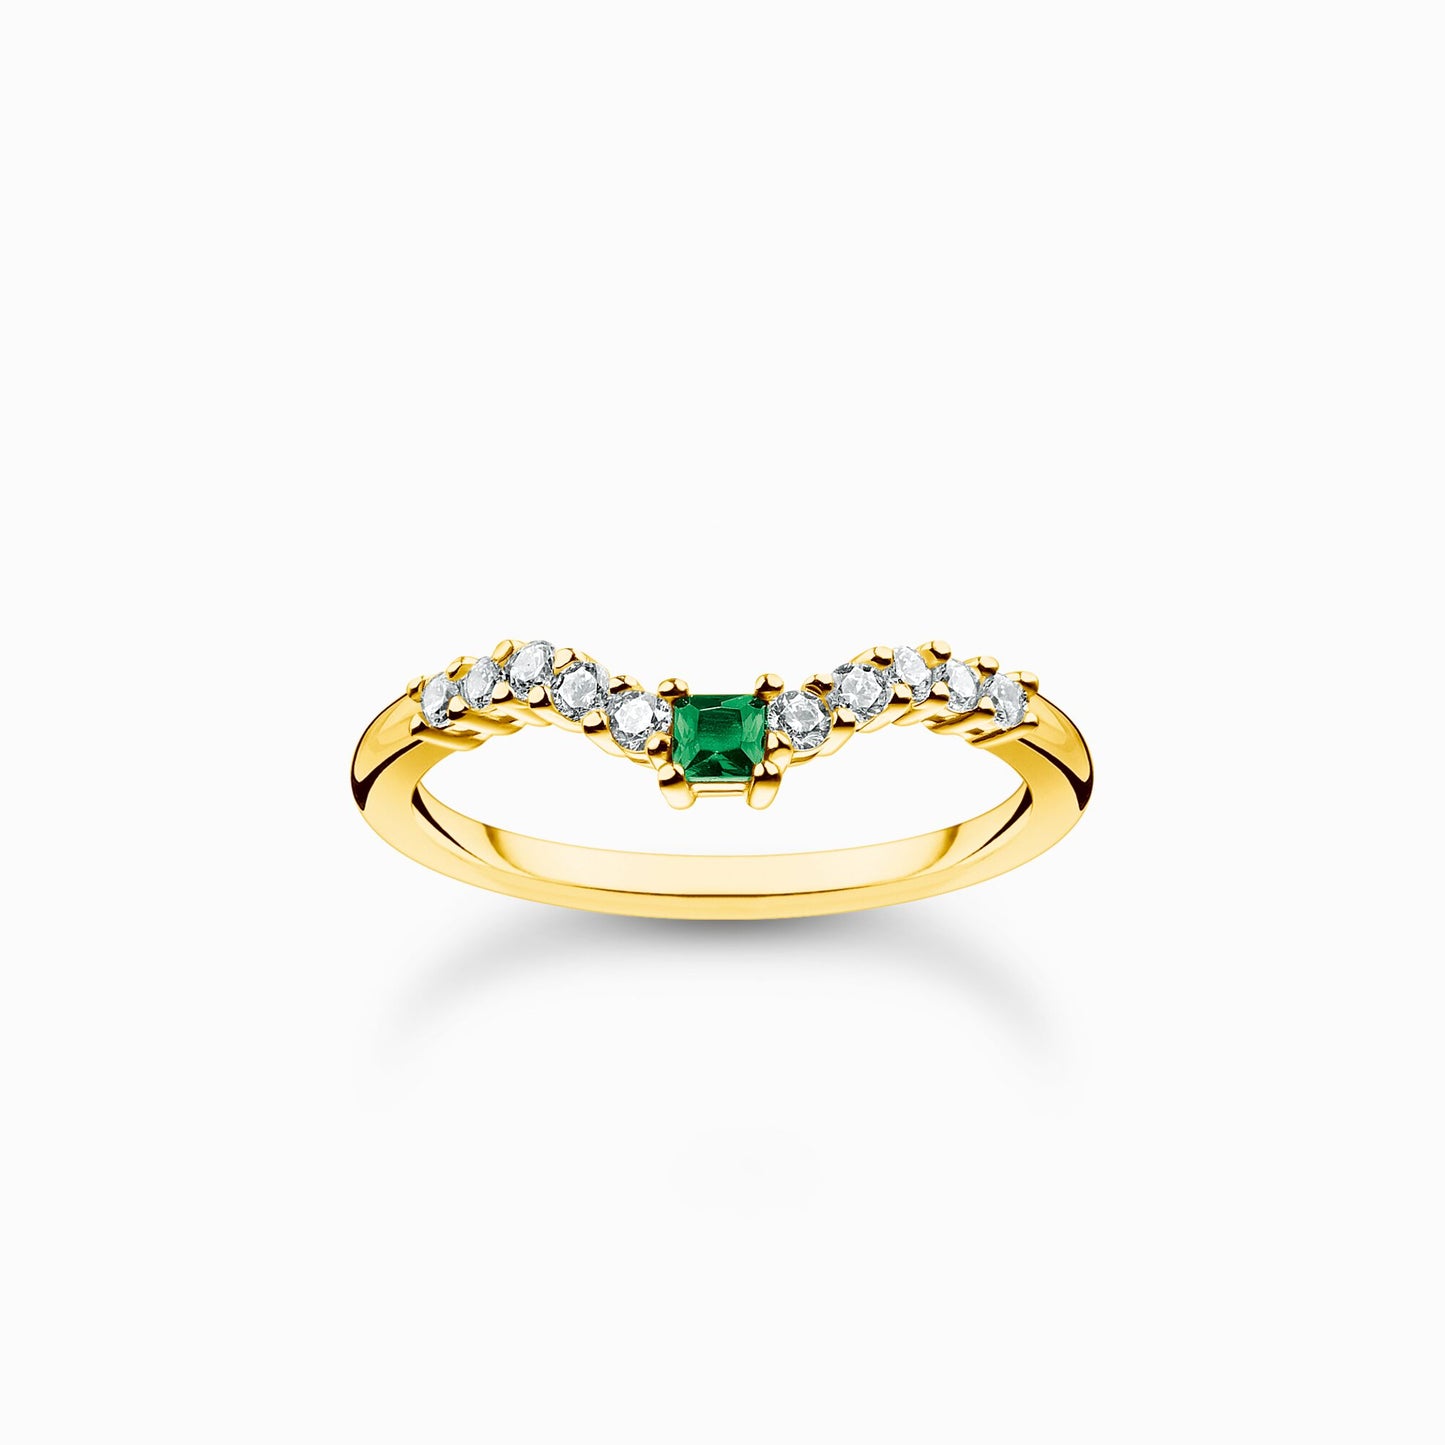 Thomas Sabo Yellow Gold Plated Green and White Cubic Zirconia Wishbone Ring Size 54 TR2398-971-7